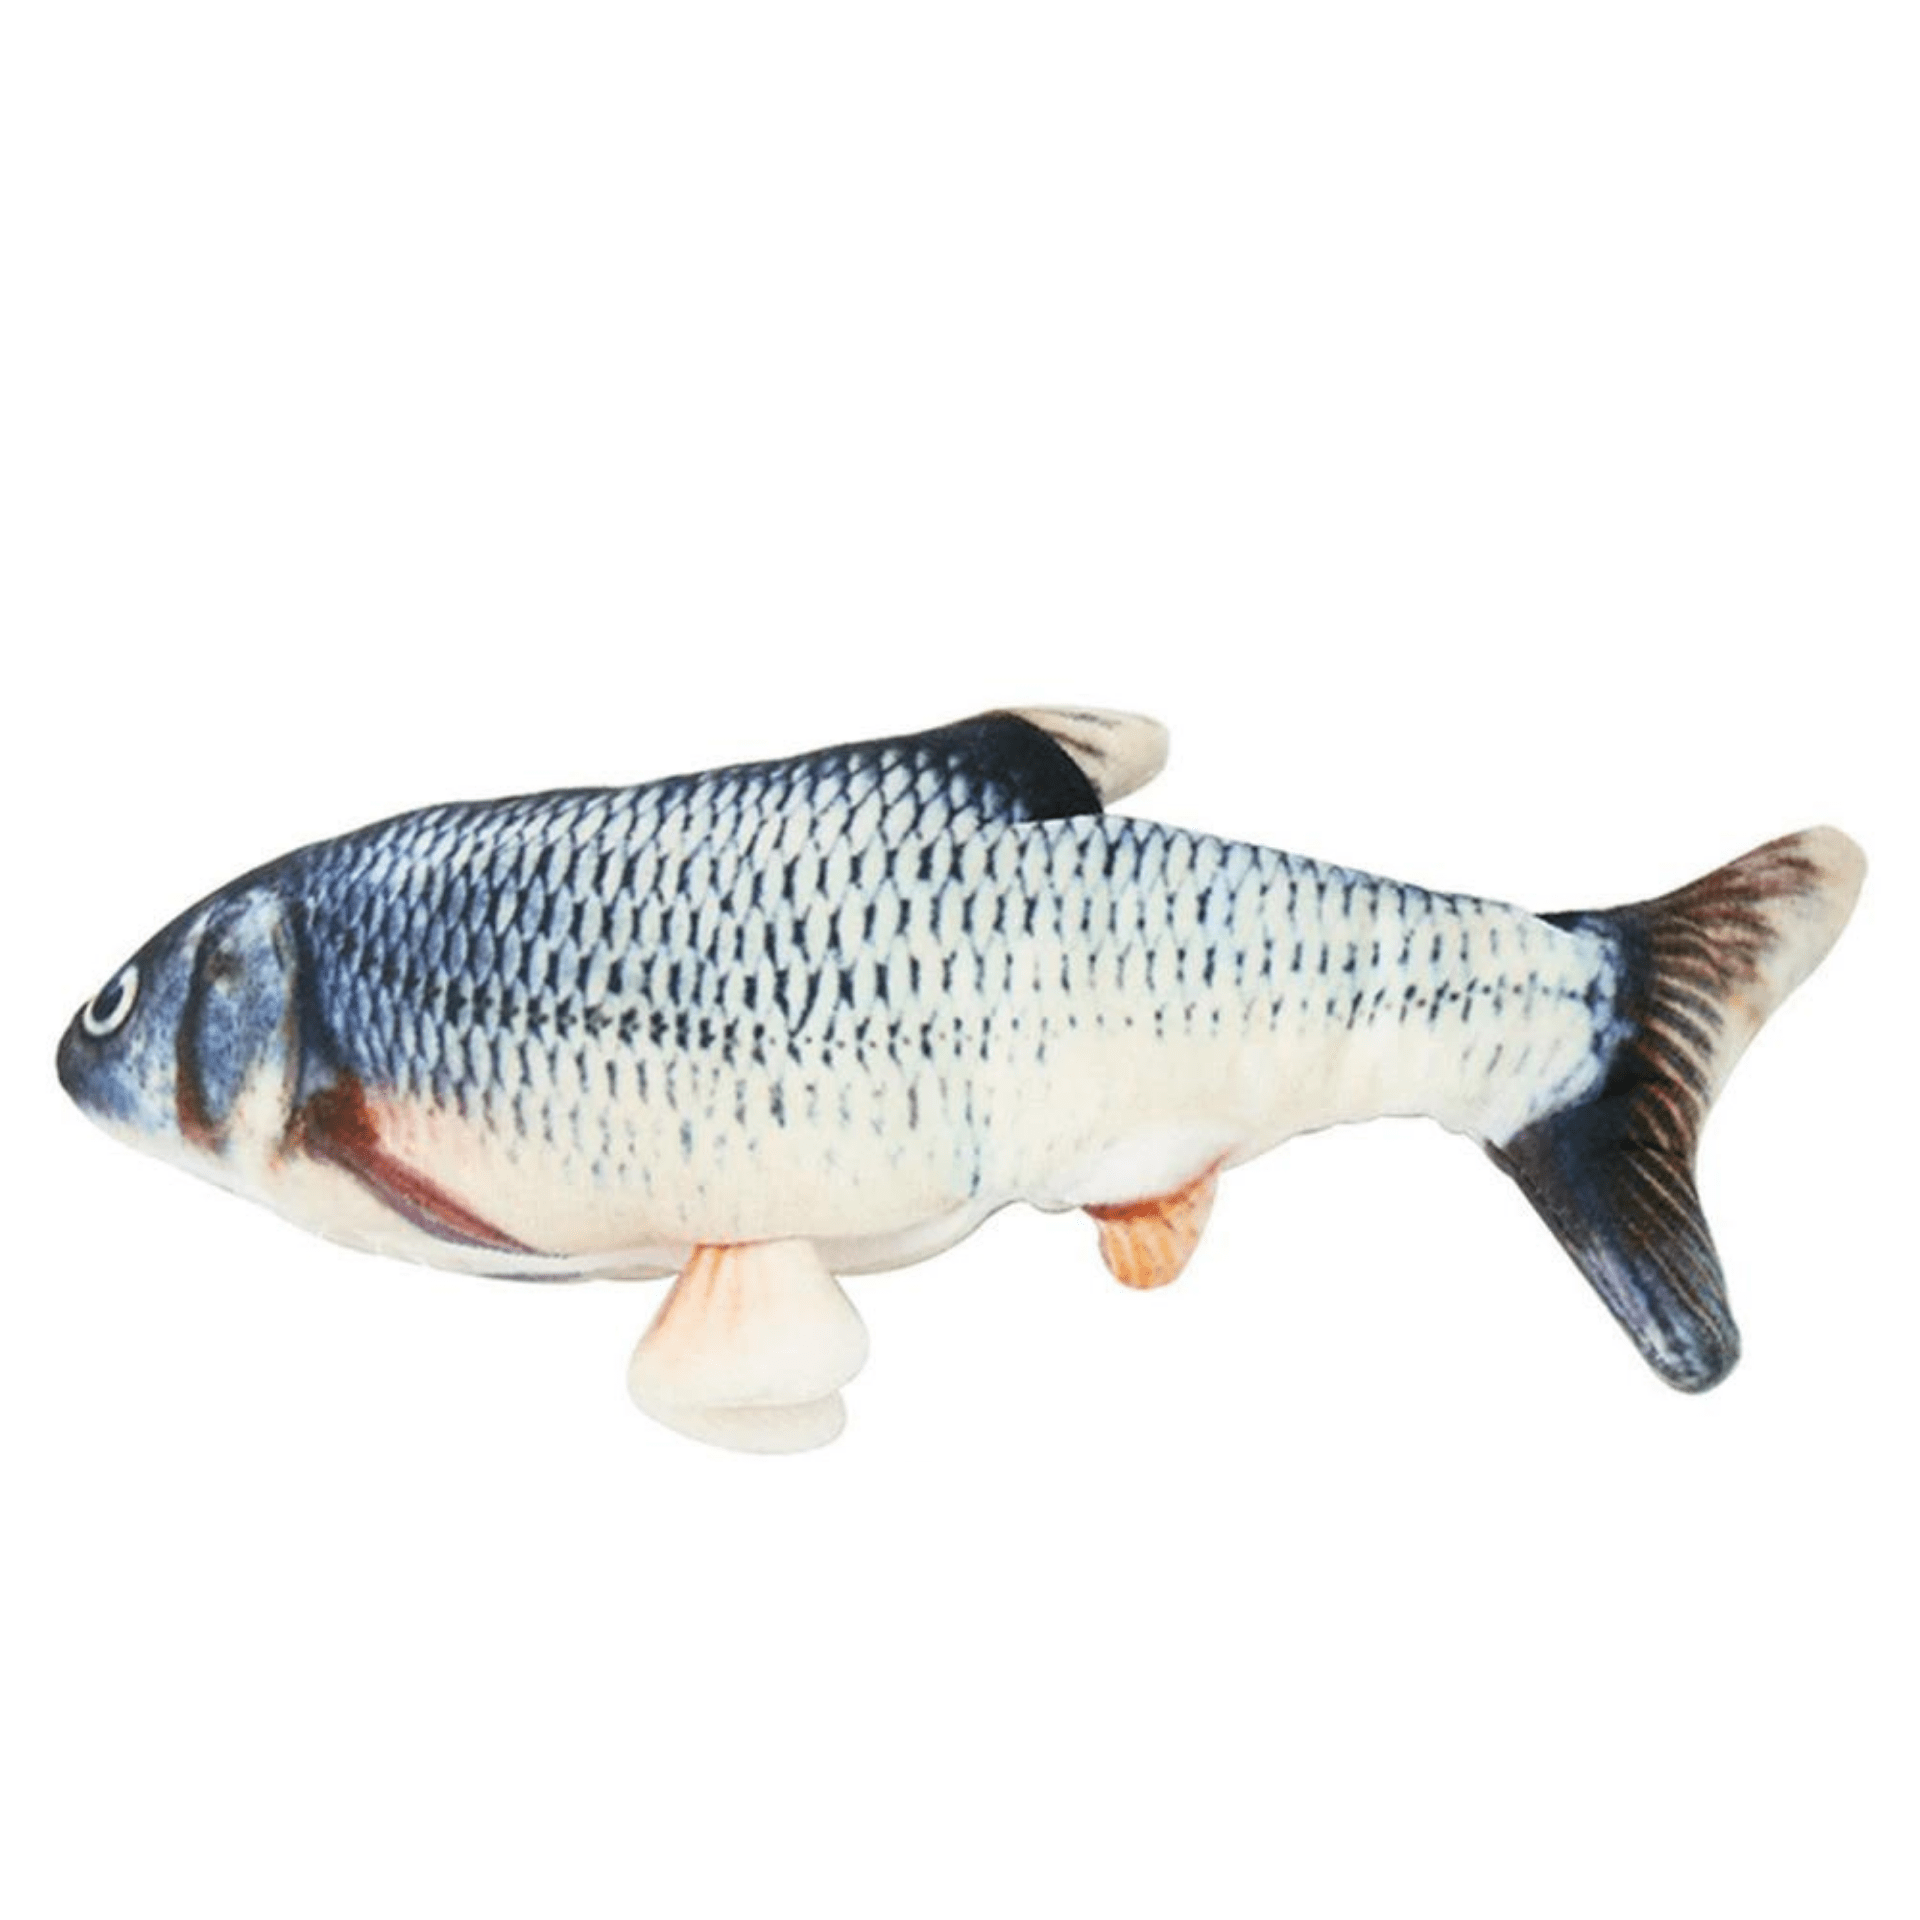 Irish Supply, FLOPPY Realistic Fish Toy For Dogs and Cats